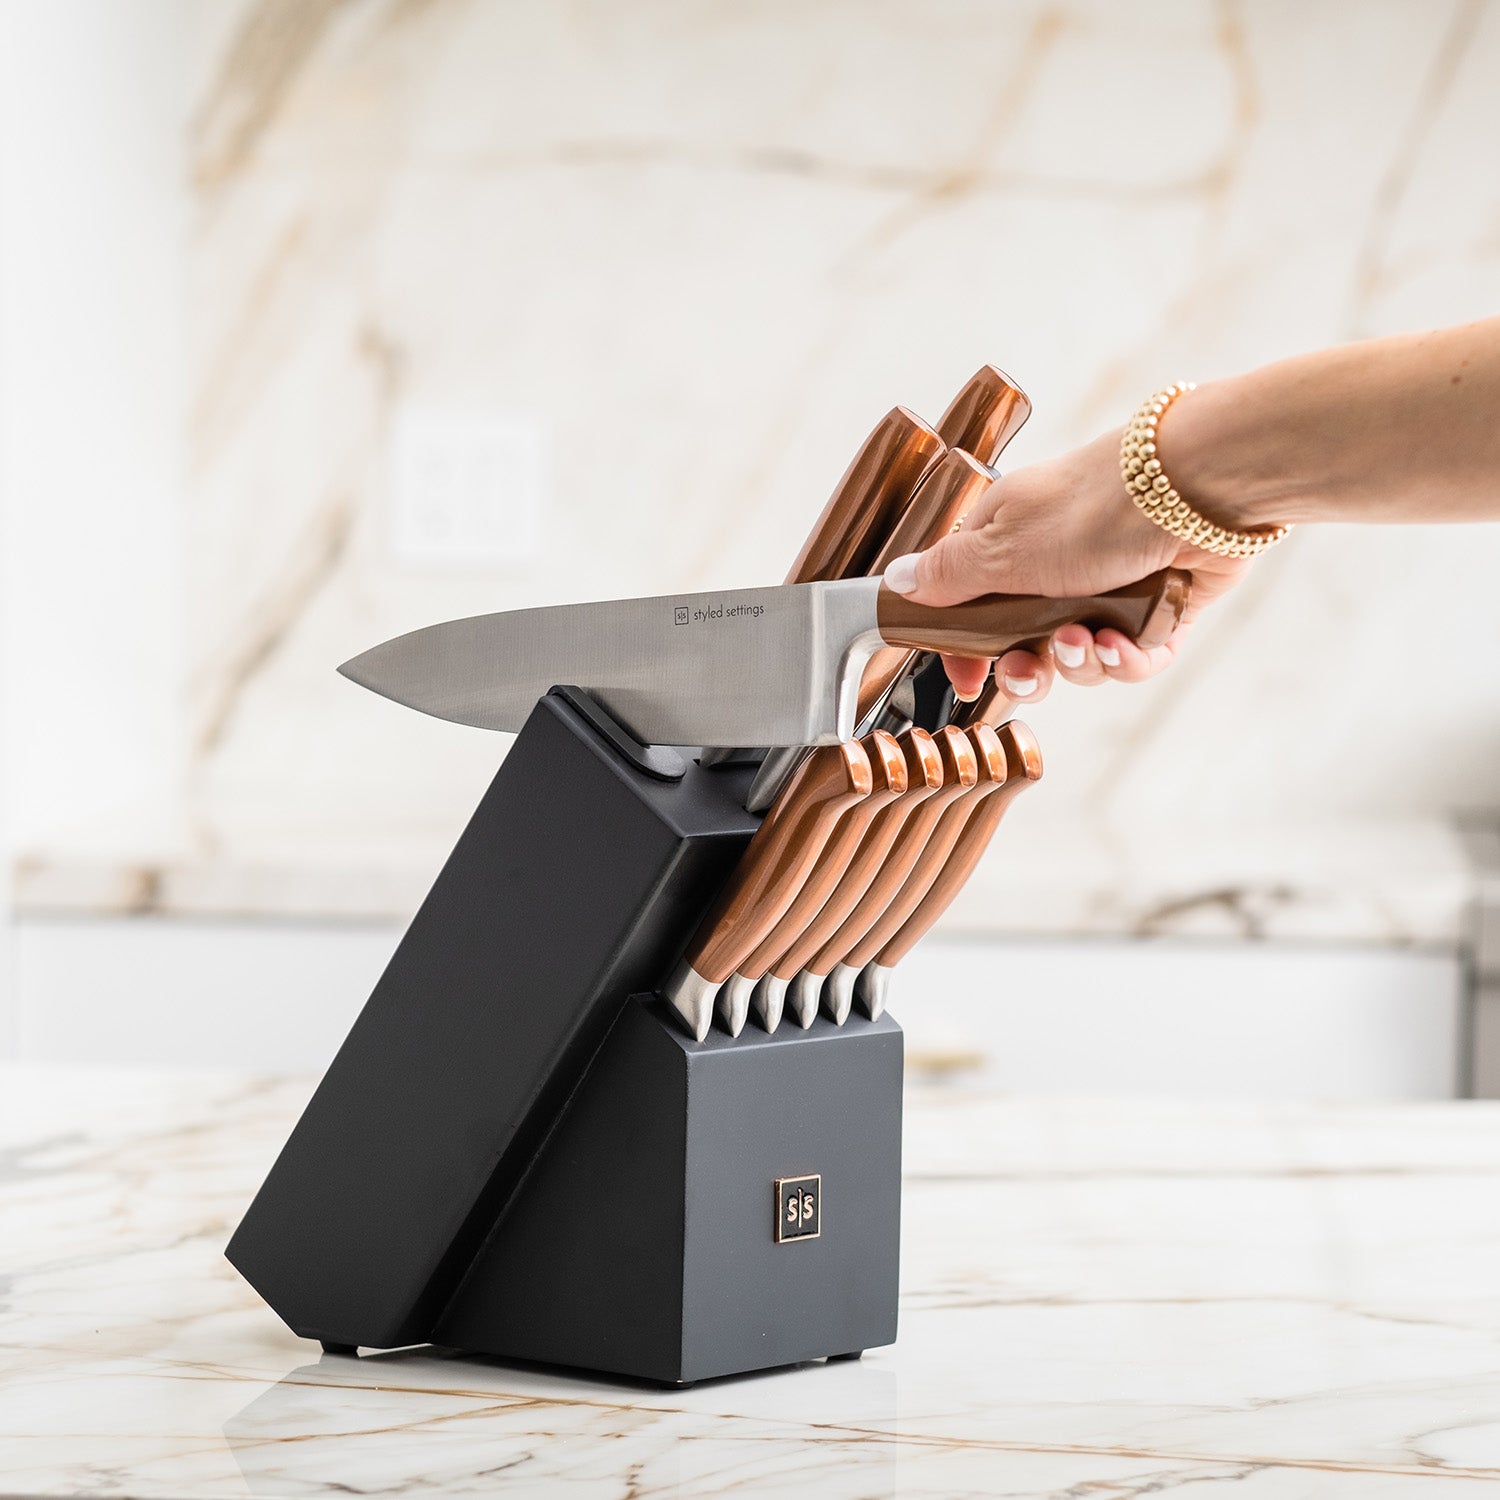 Styled Settings Copper Stainless Steel Knife Set with Walnut Knife Block, Gold